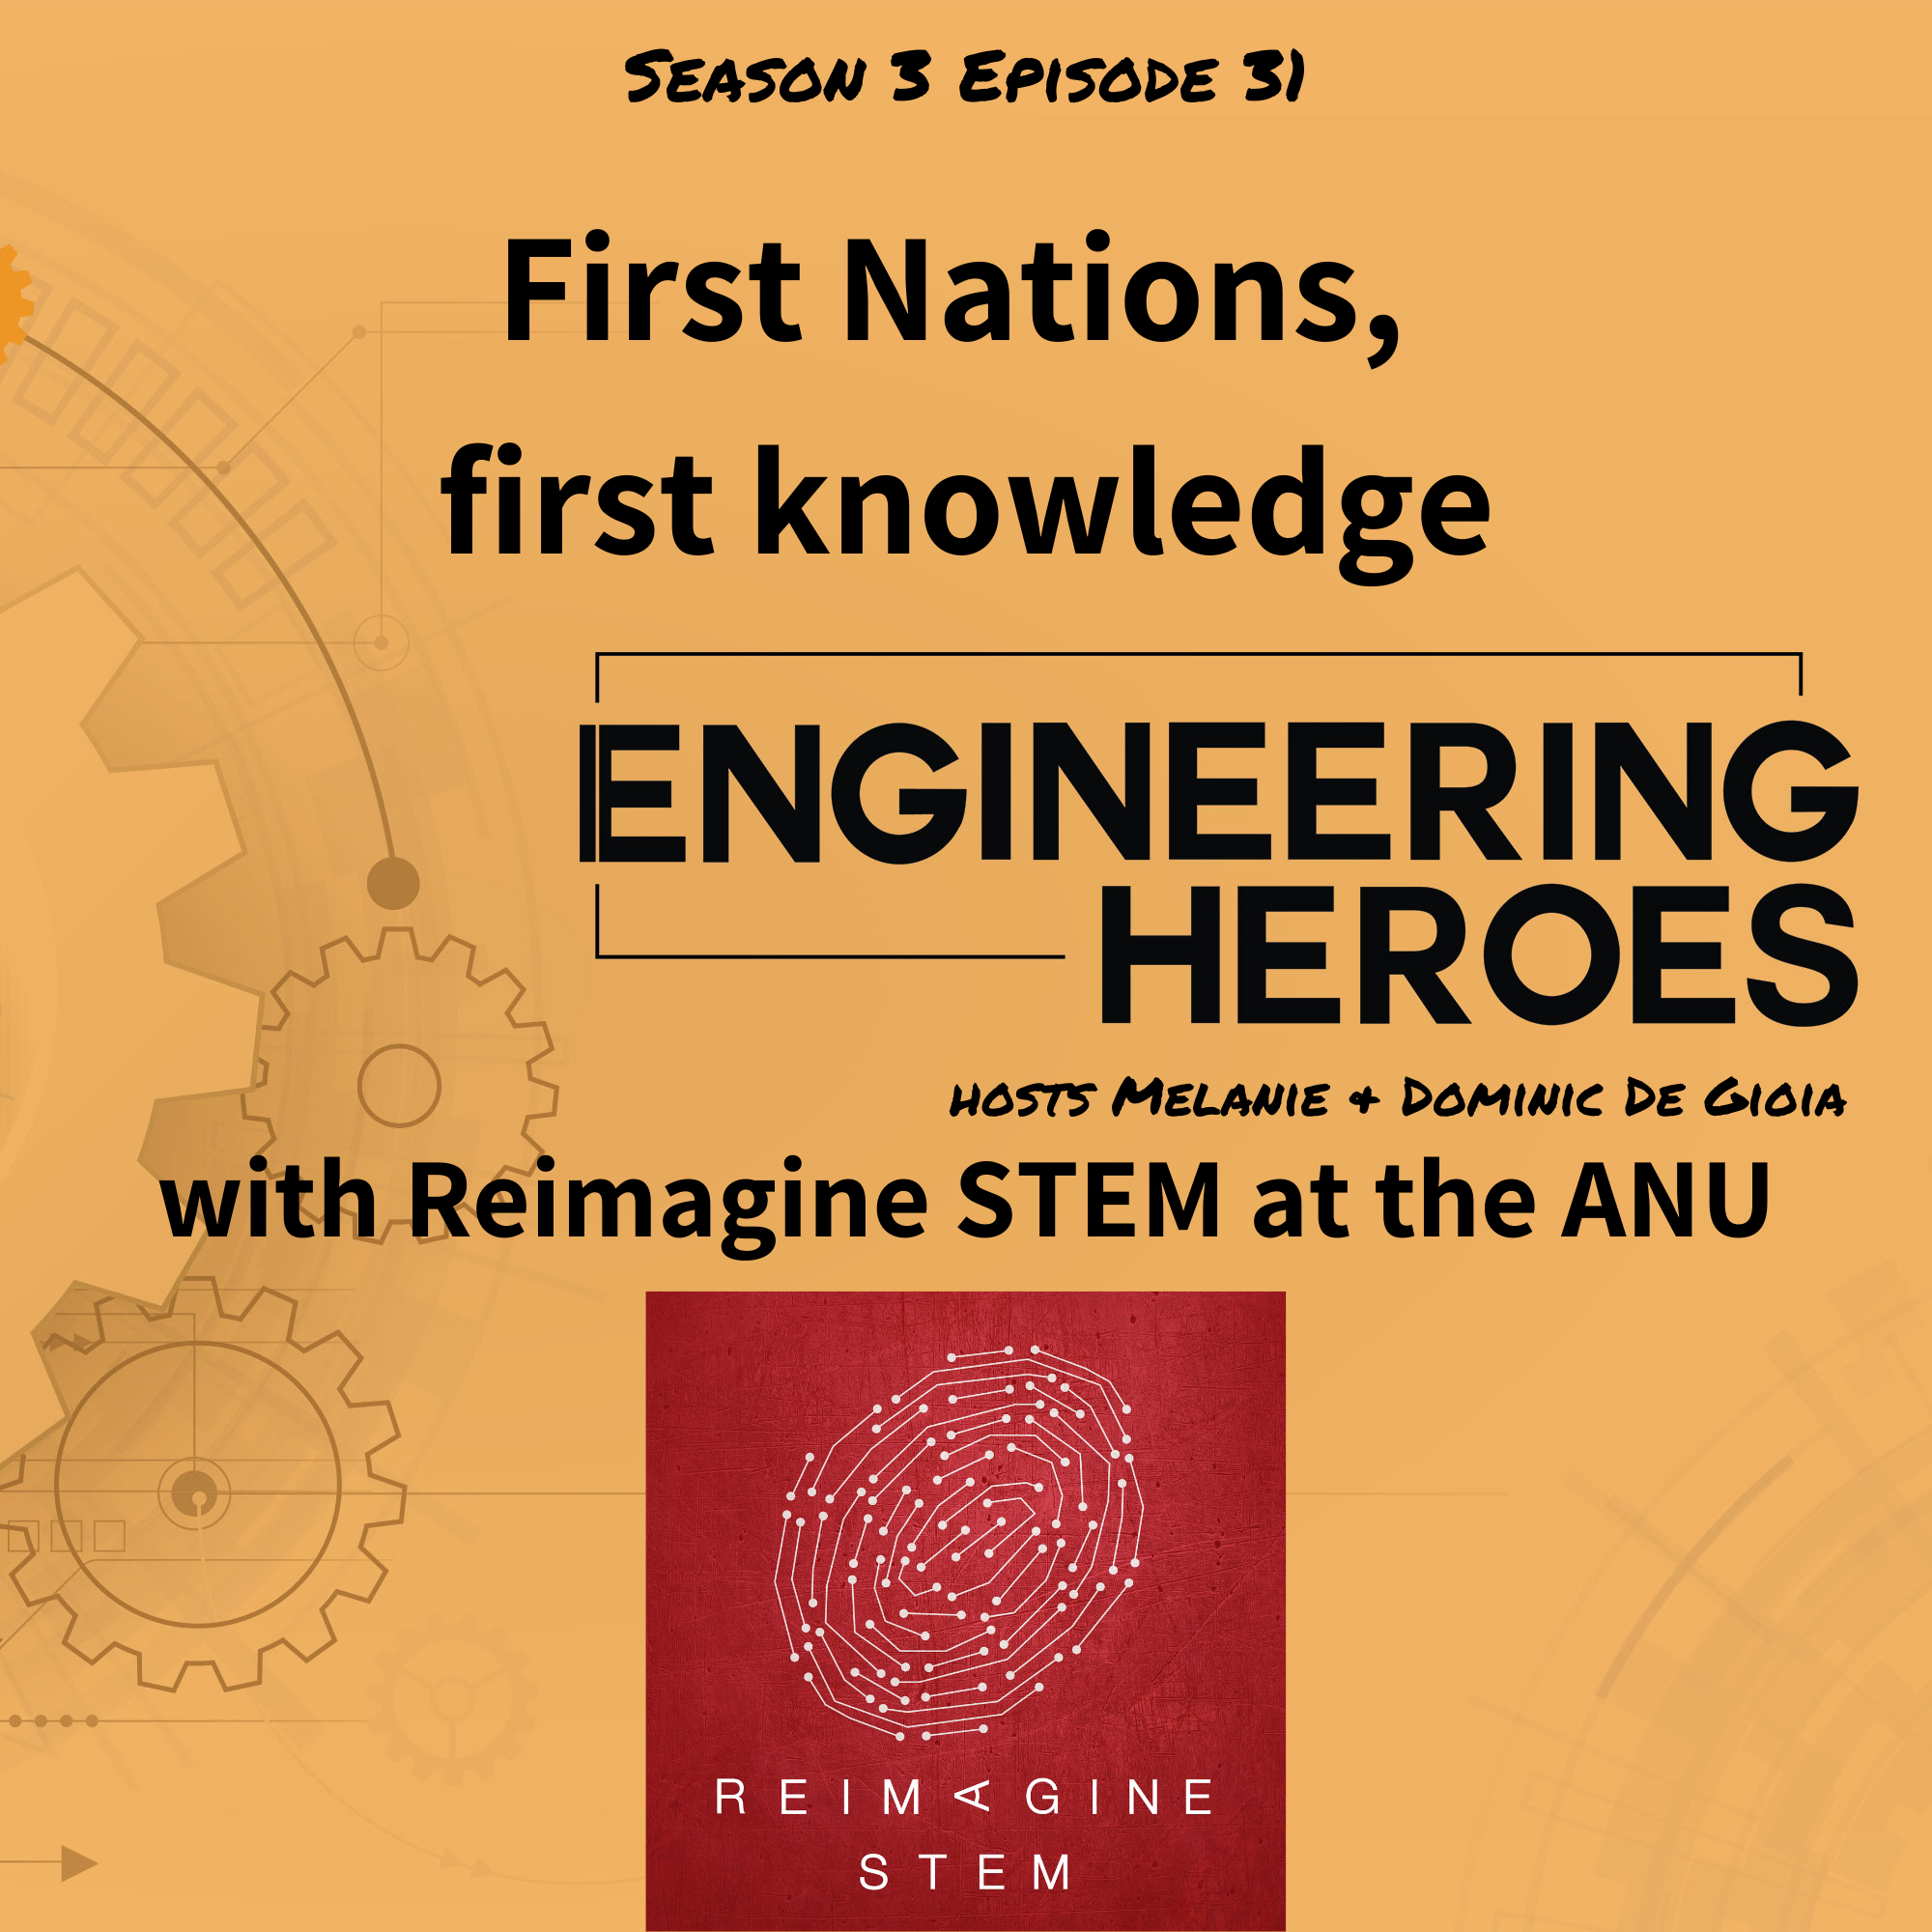 First Nations, first knowledge with Reimagine STEM at the ANU